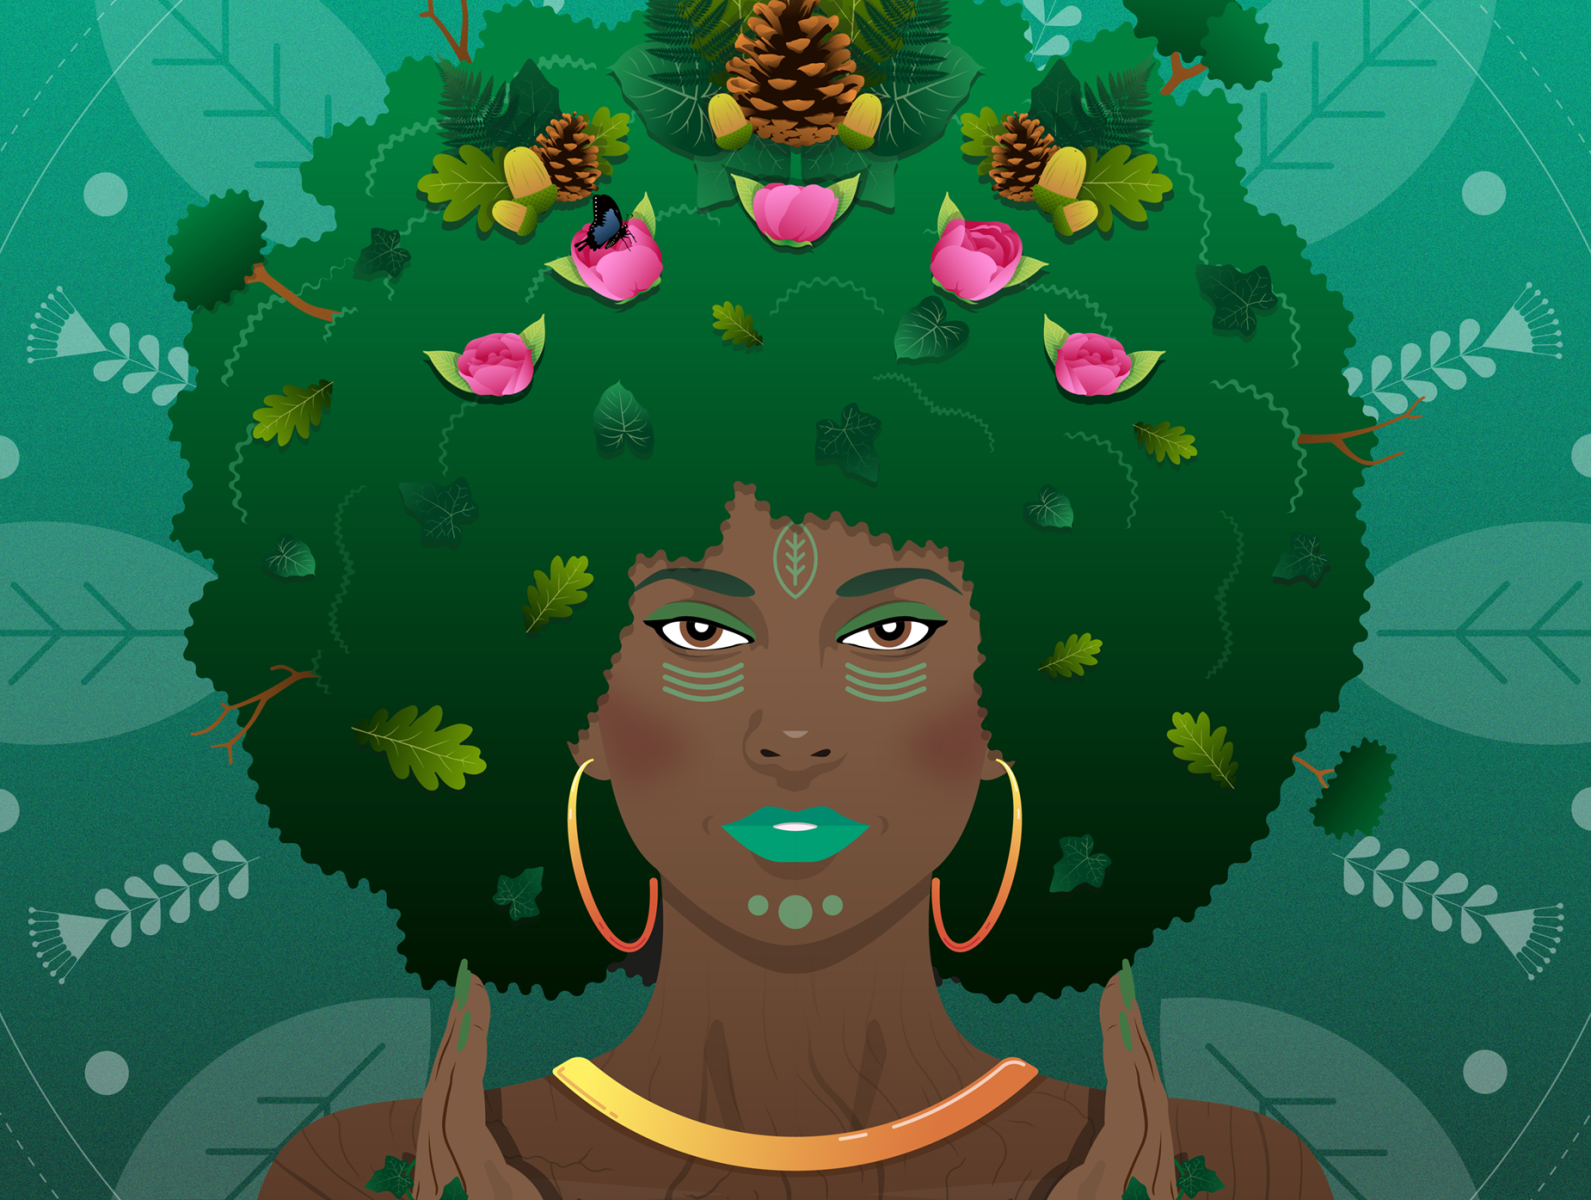 Sol Sister - Nature Goddess by Angie Mathot on Dribbble